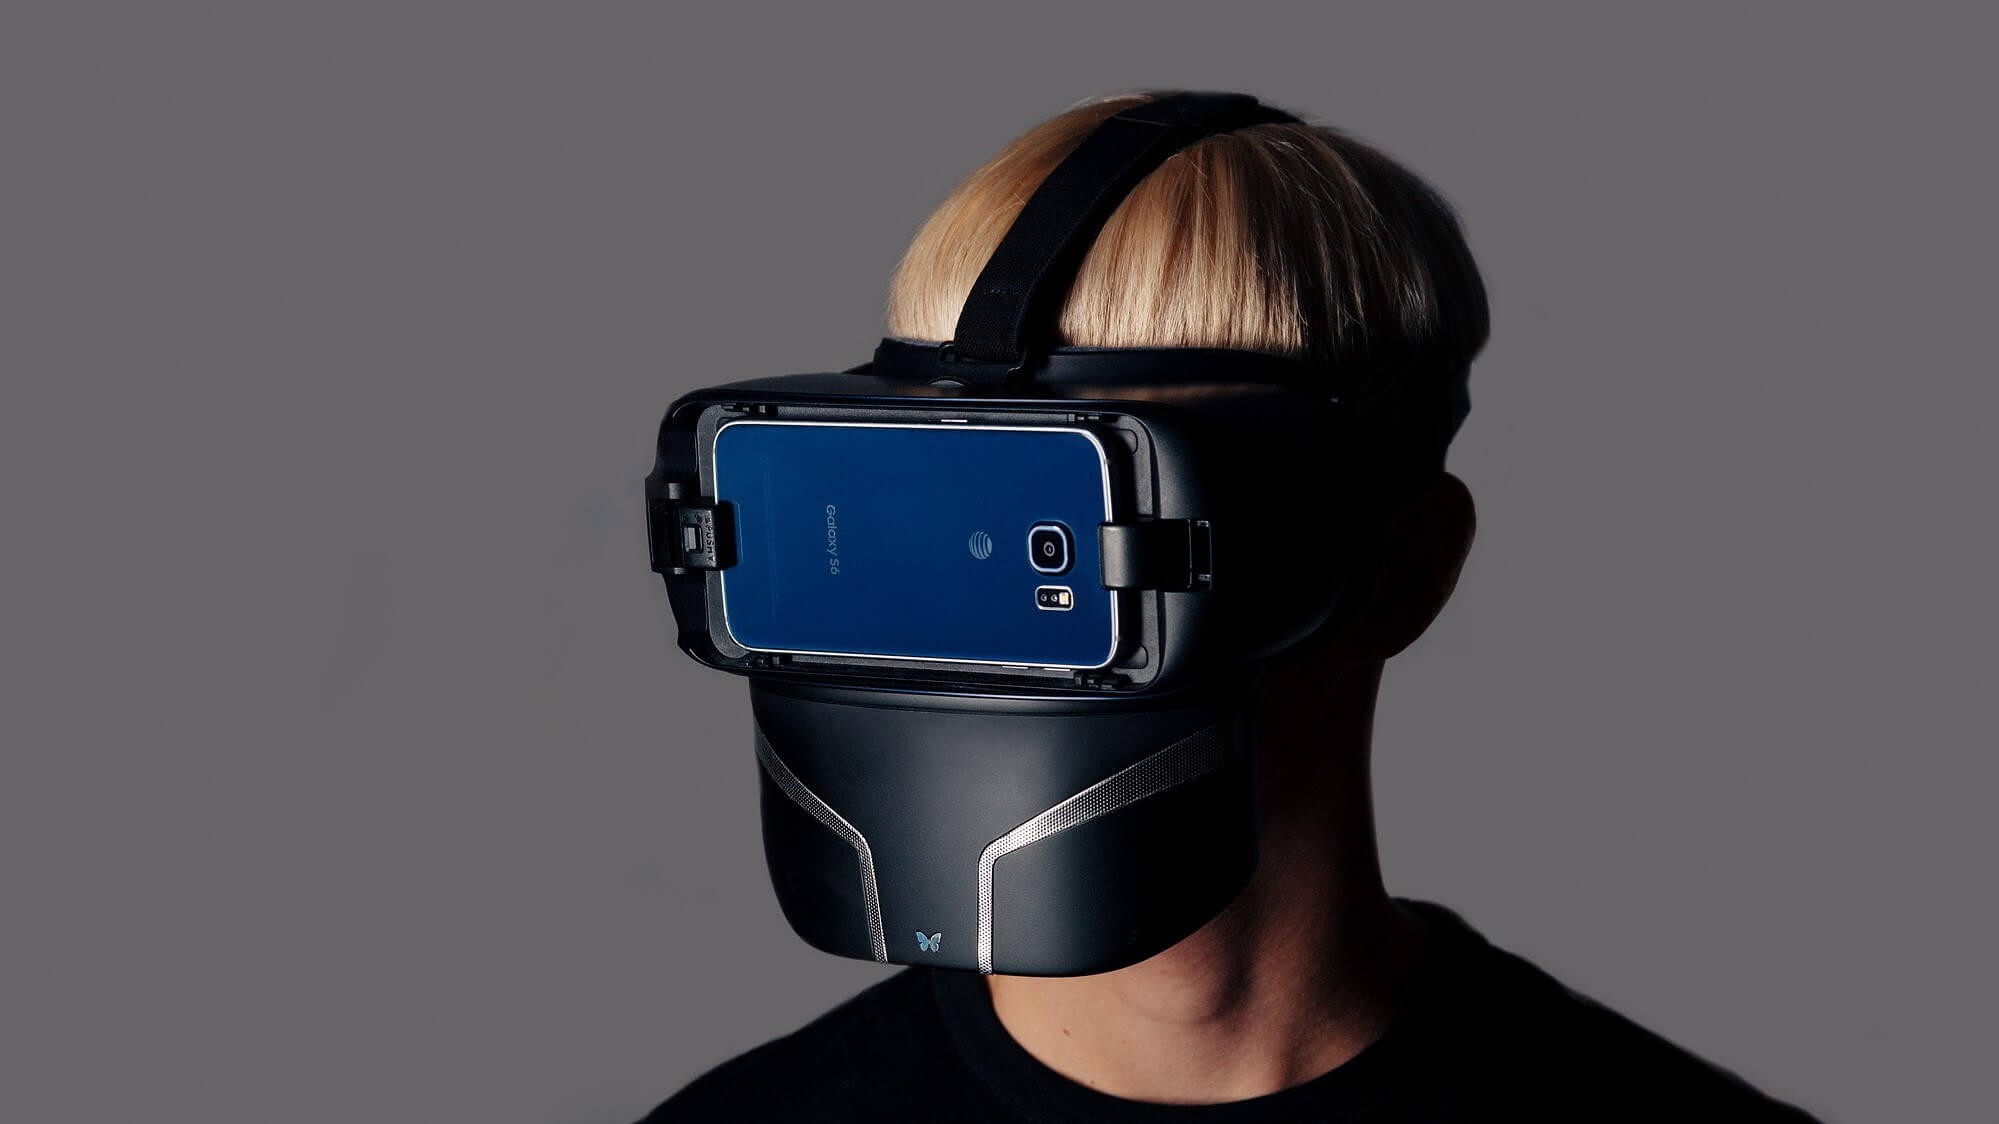 Feelreal Sensory Mask brings smells and other sensations into VR